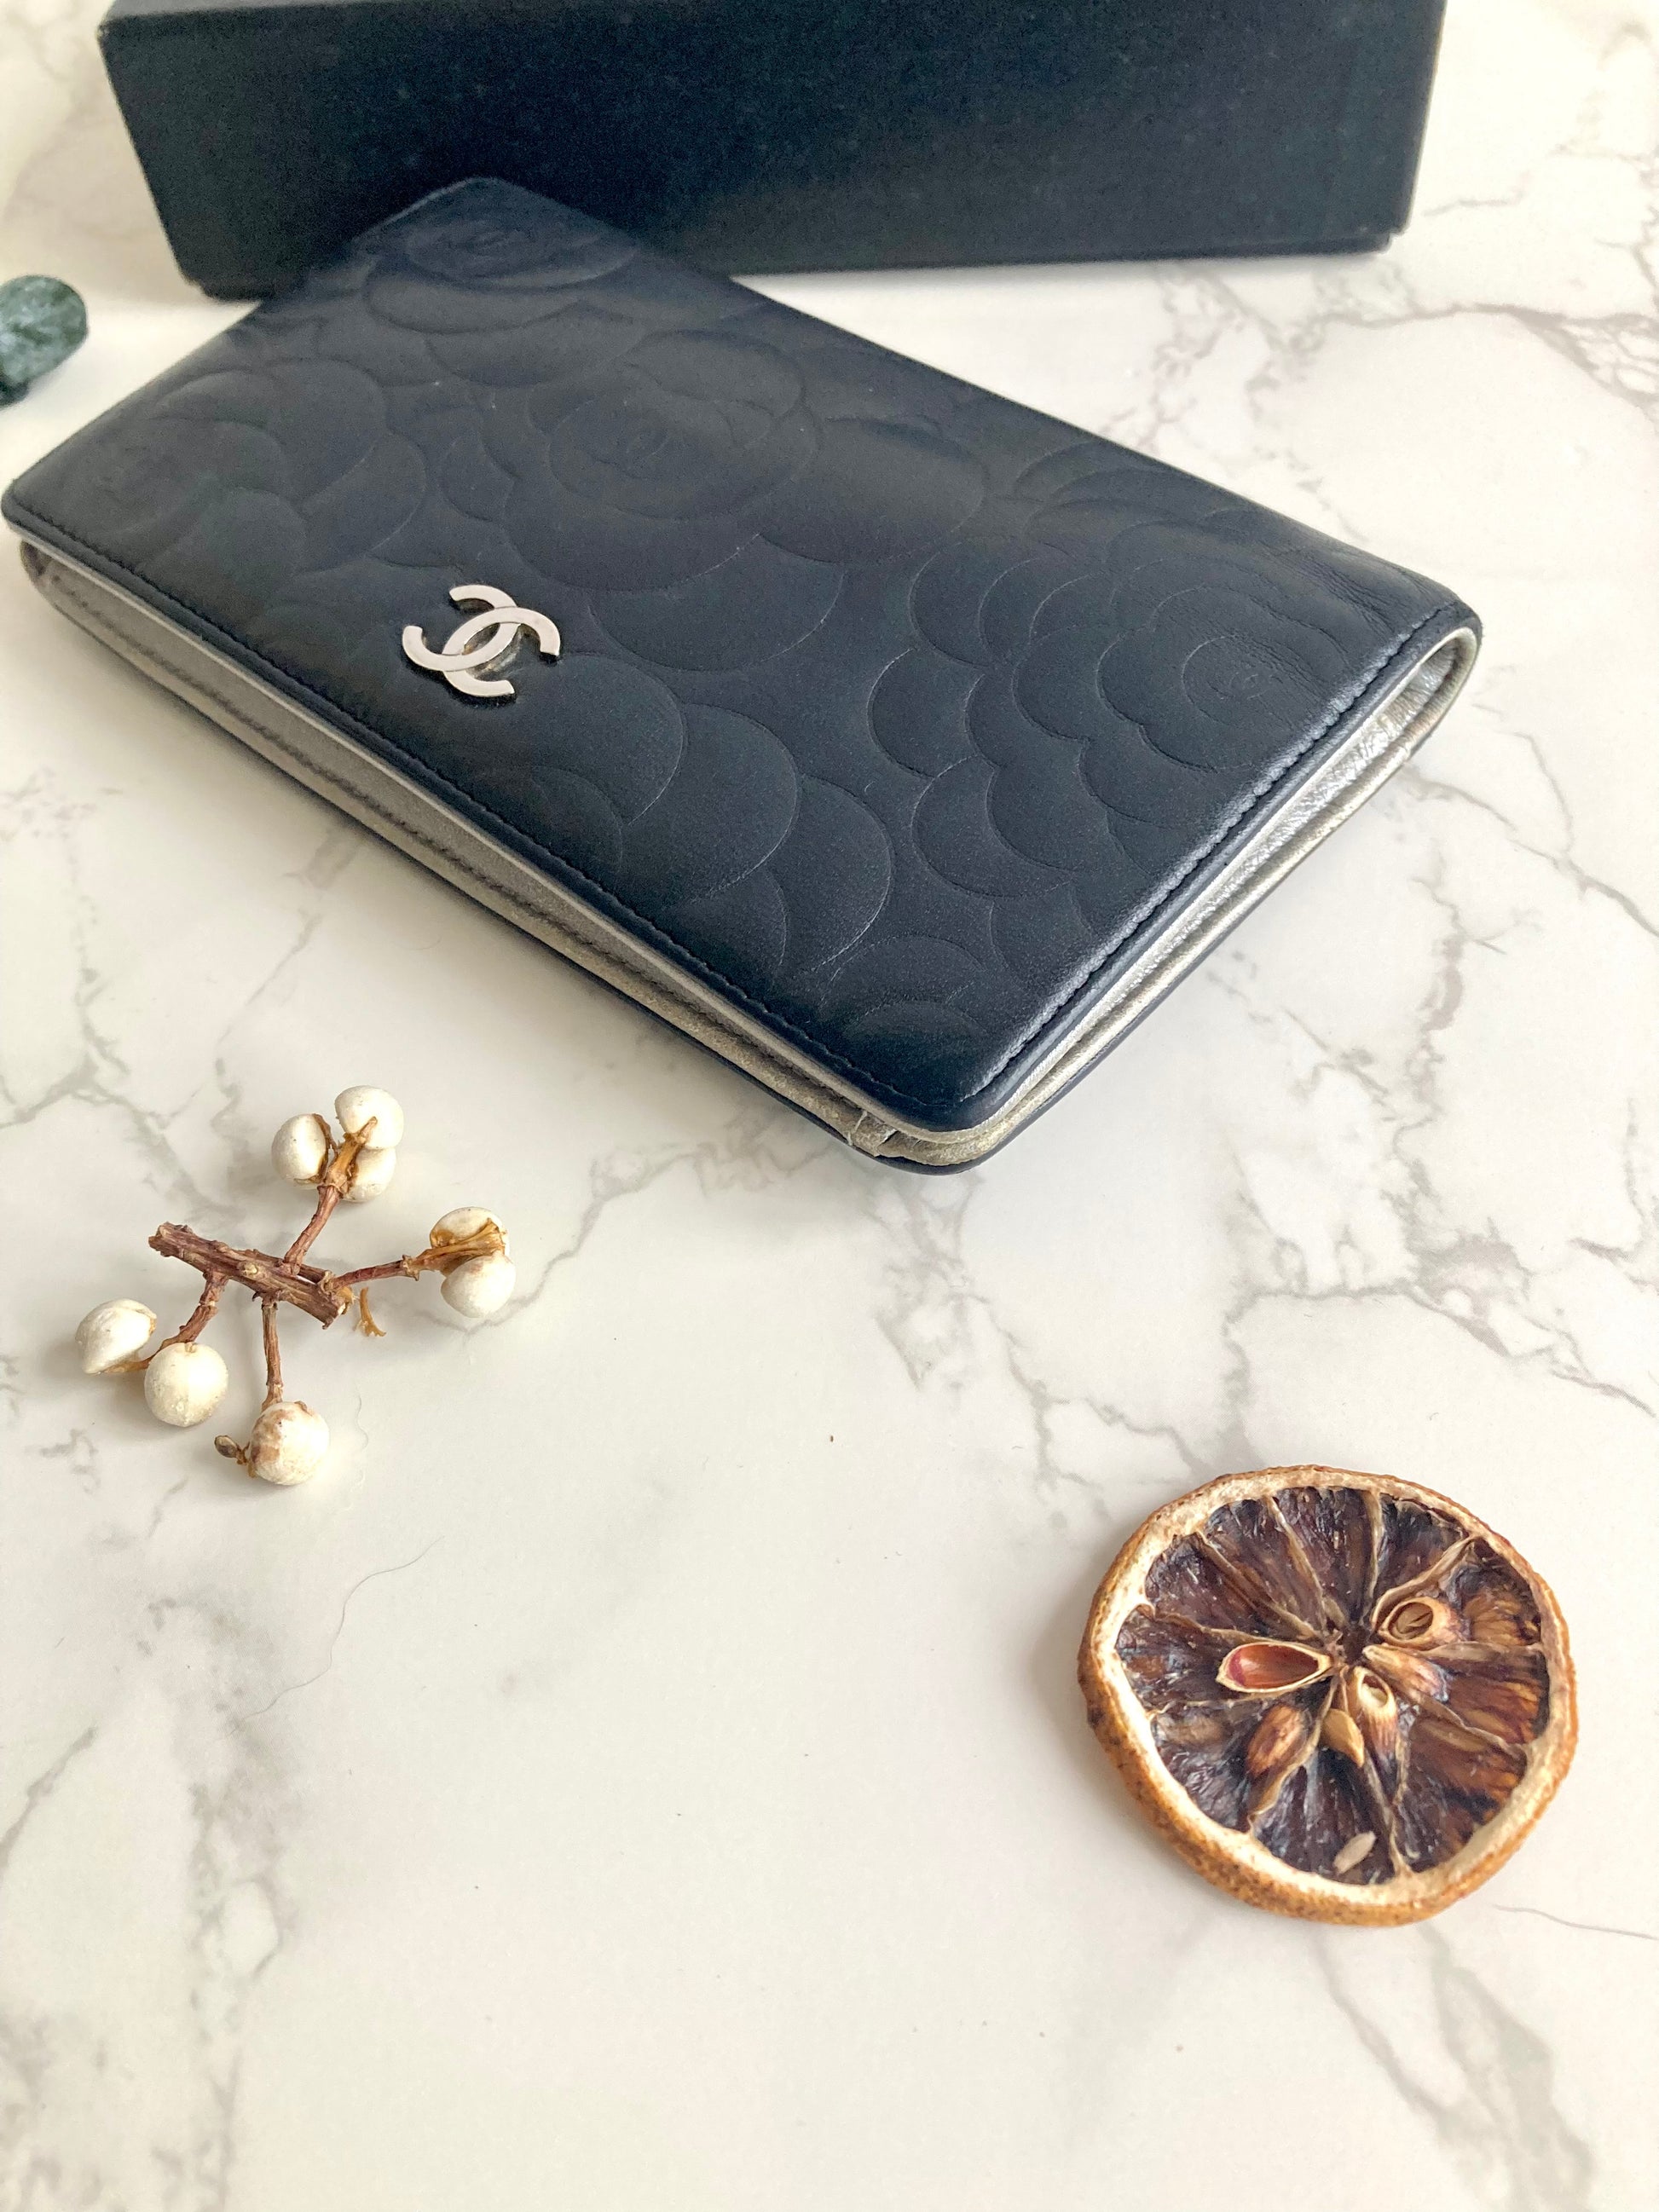 CHANEL Camellia Silver CC Long Wallet (with Add-on Chain)